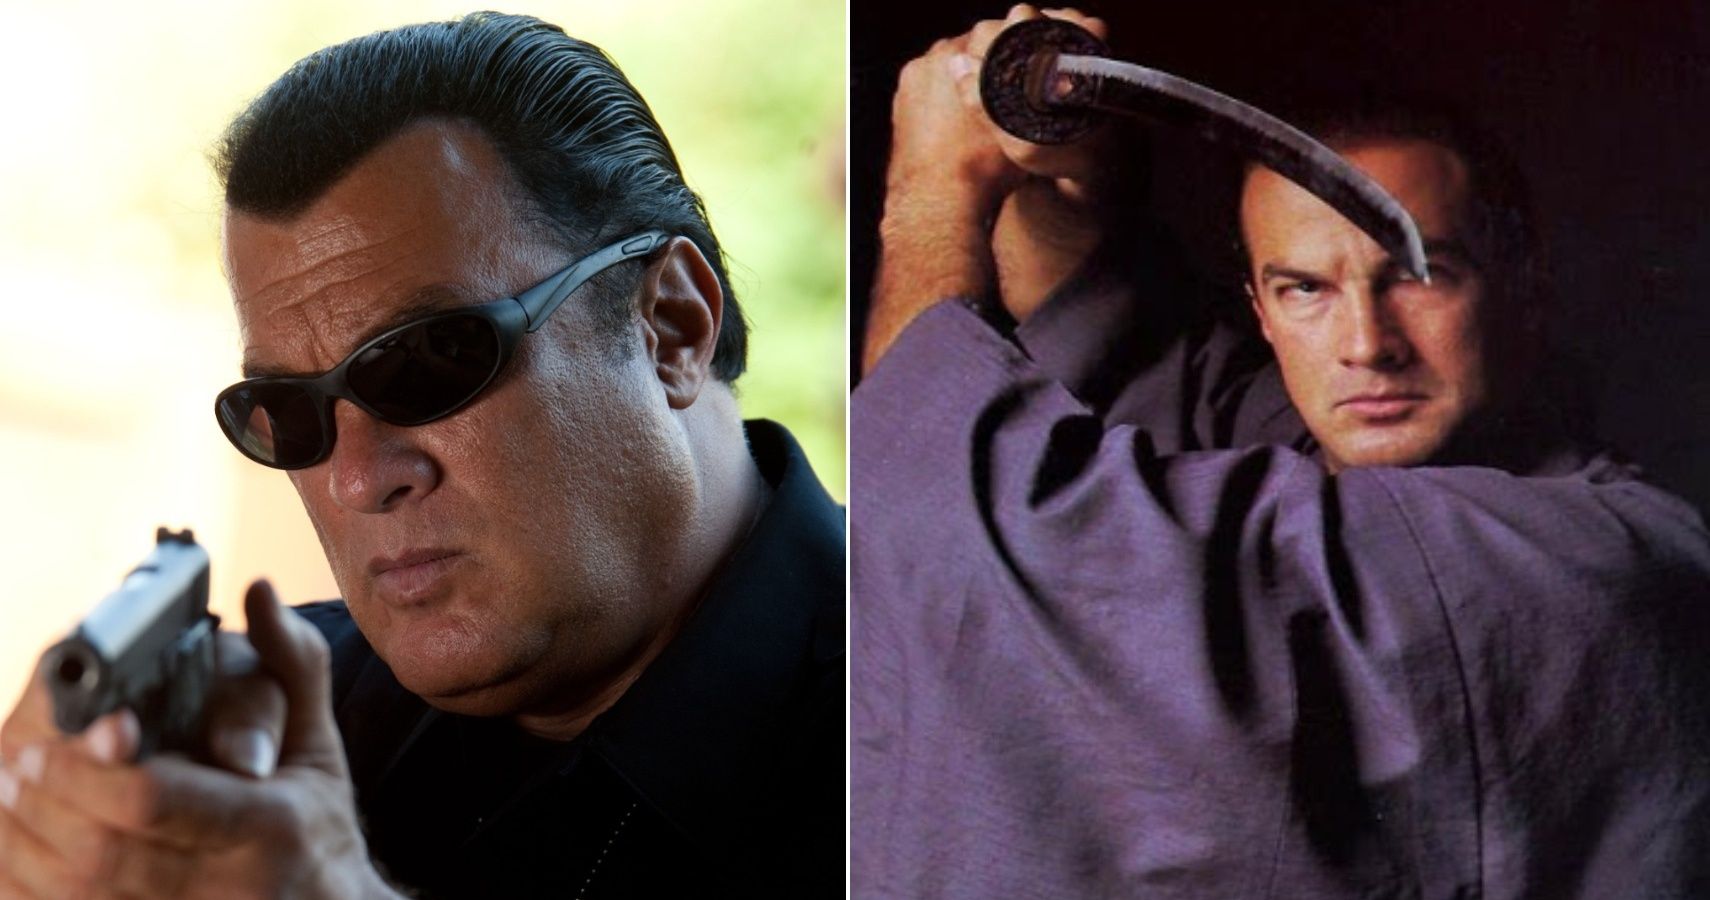 Steven Seagal 10 Hilariously Badass Things That Can Only Happen In His Movies